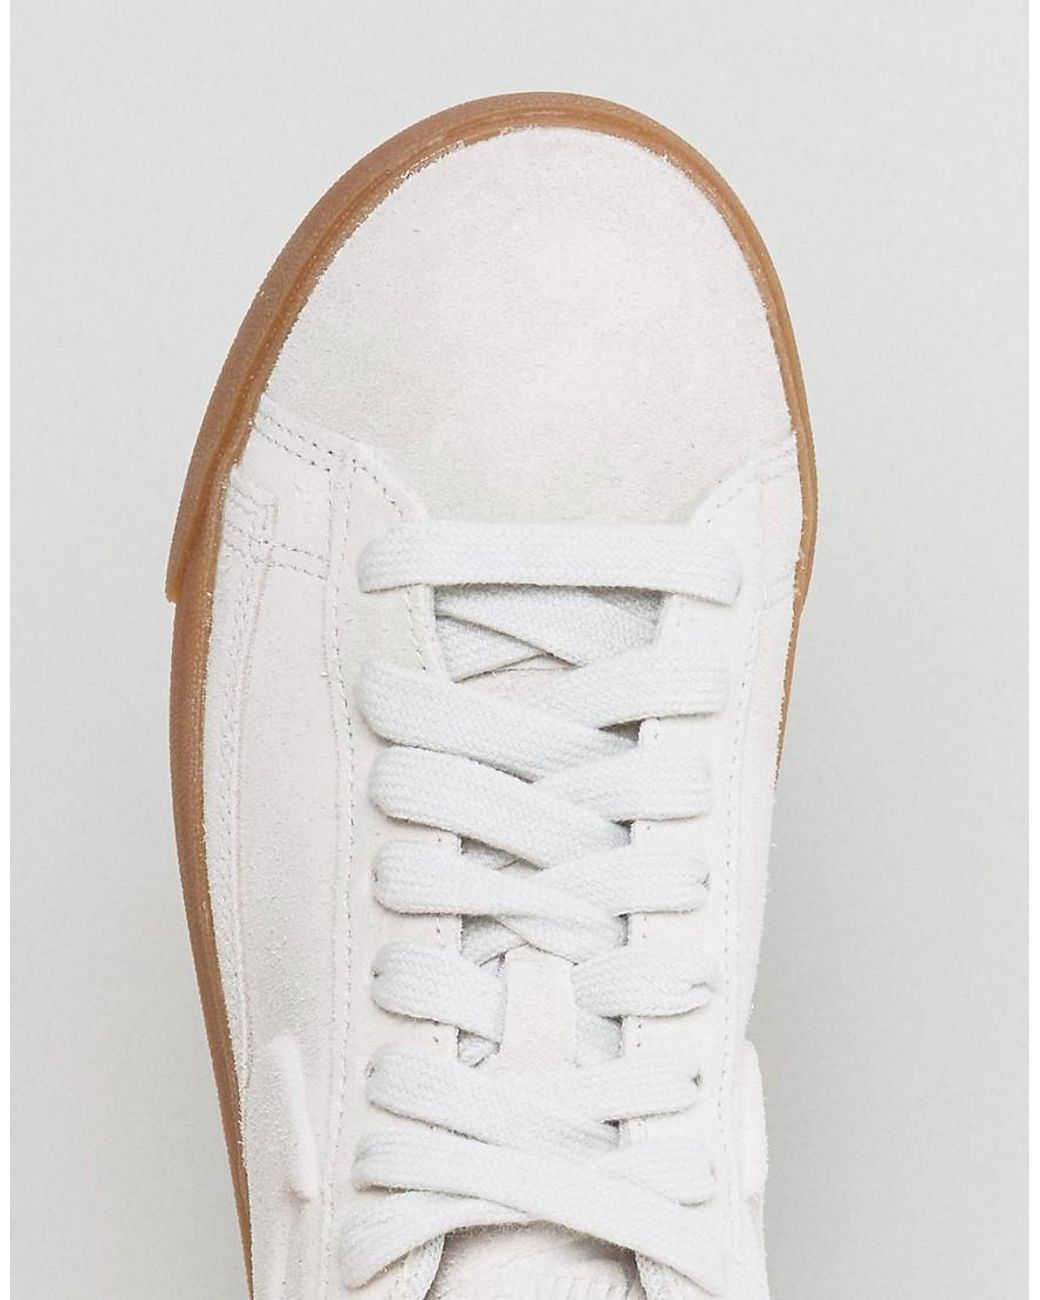 Nike Blazer Low Trainers In Beige Suede With Gum Sole in Natural | Lyst  Australia